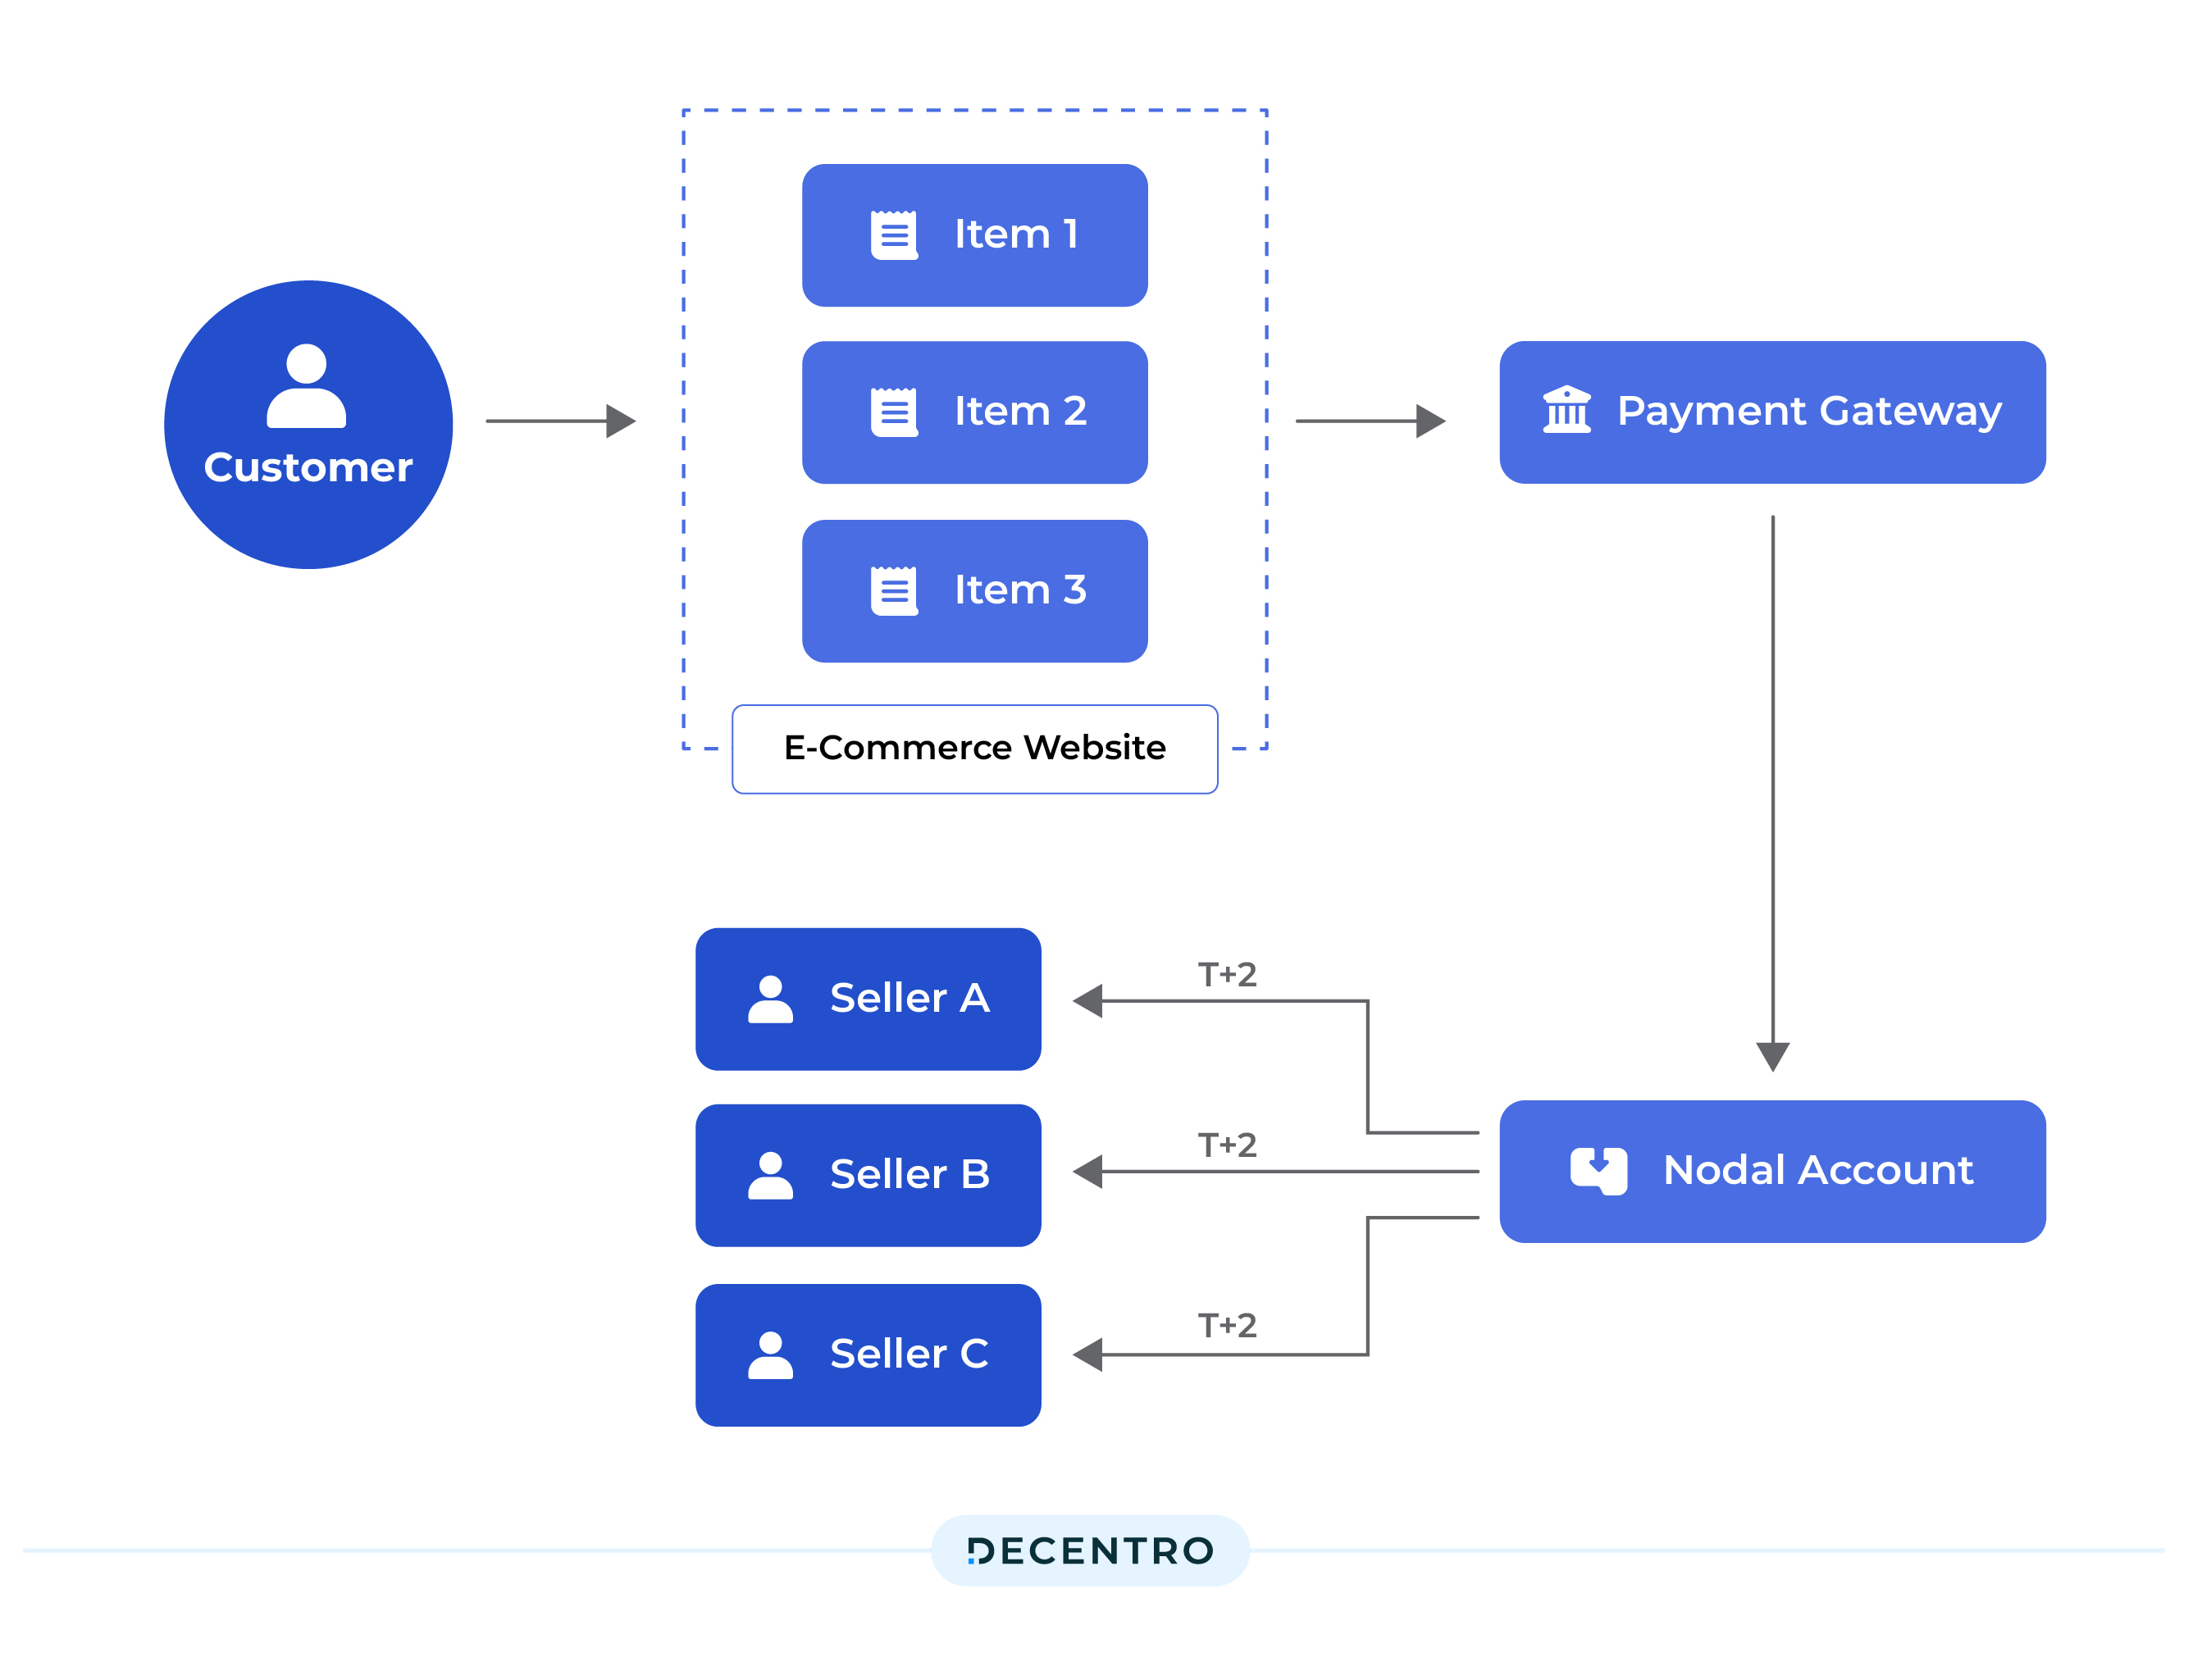 The Nodal Account Flow with a Payment Gateway